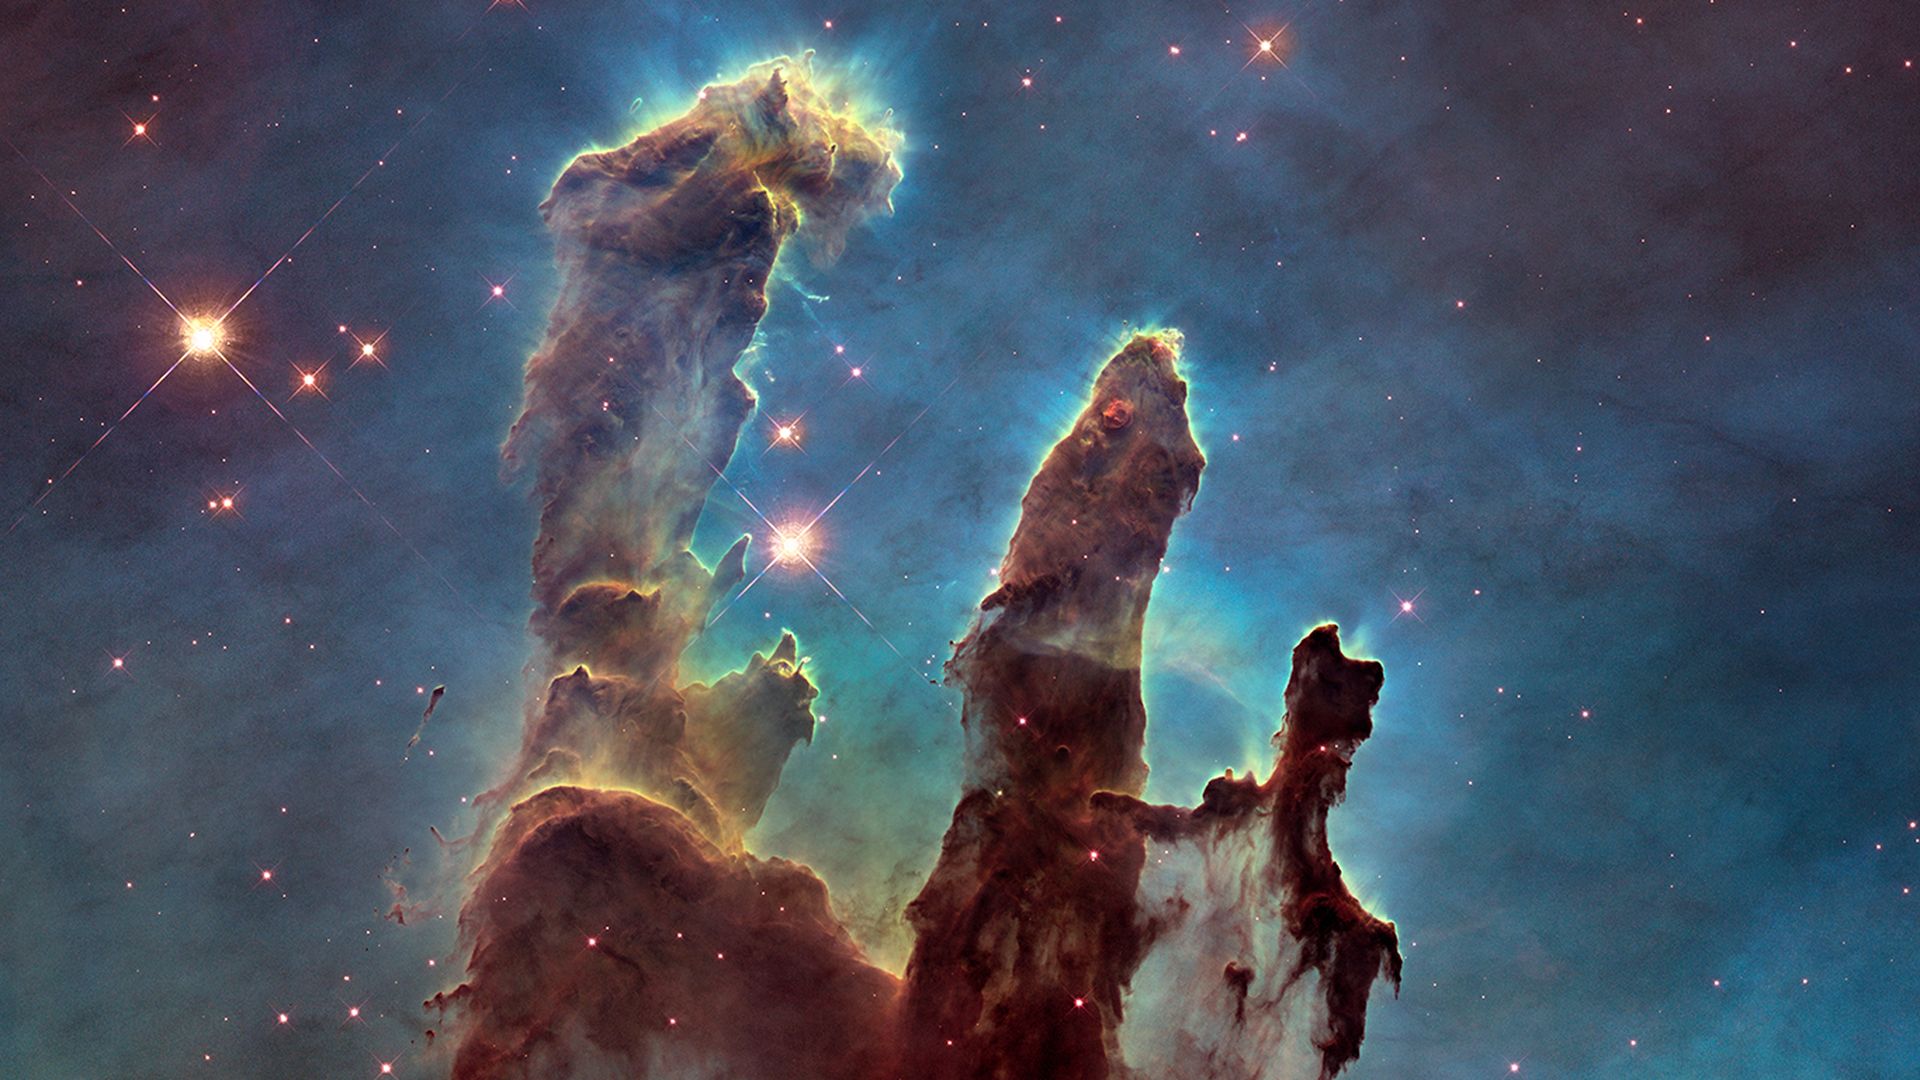 Pillars of gas and stars in brown on a background of blue and green light as seen by Hubble.